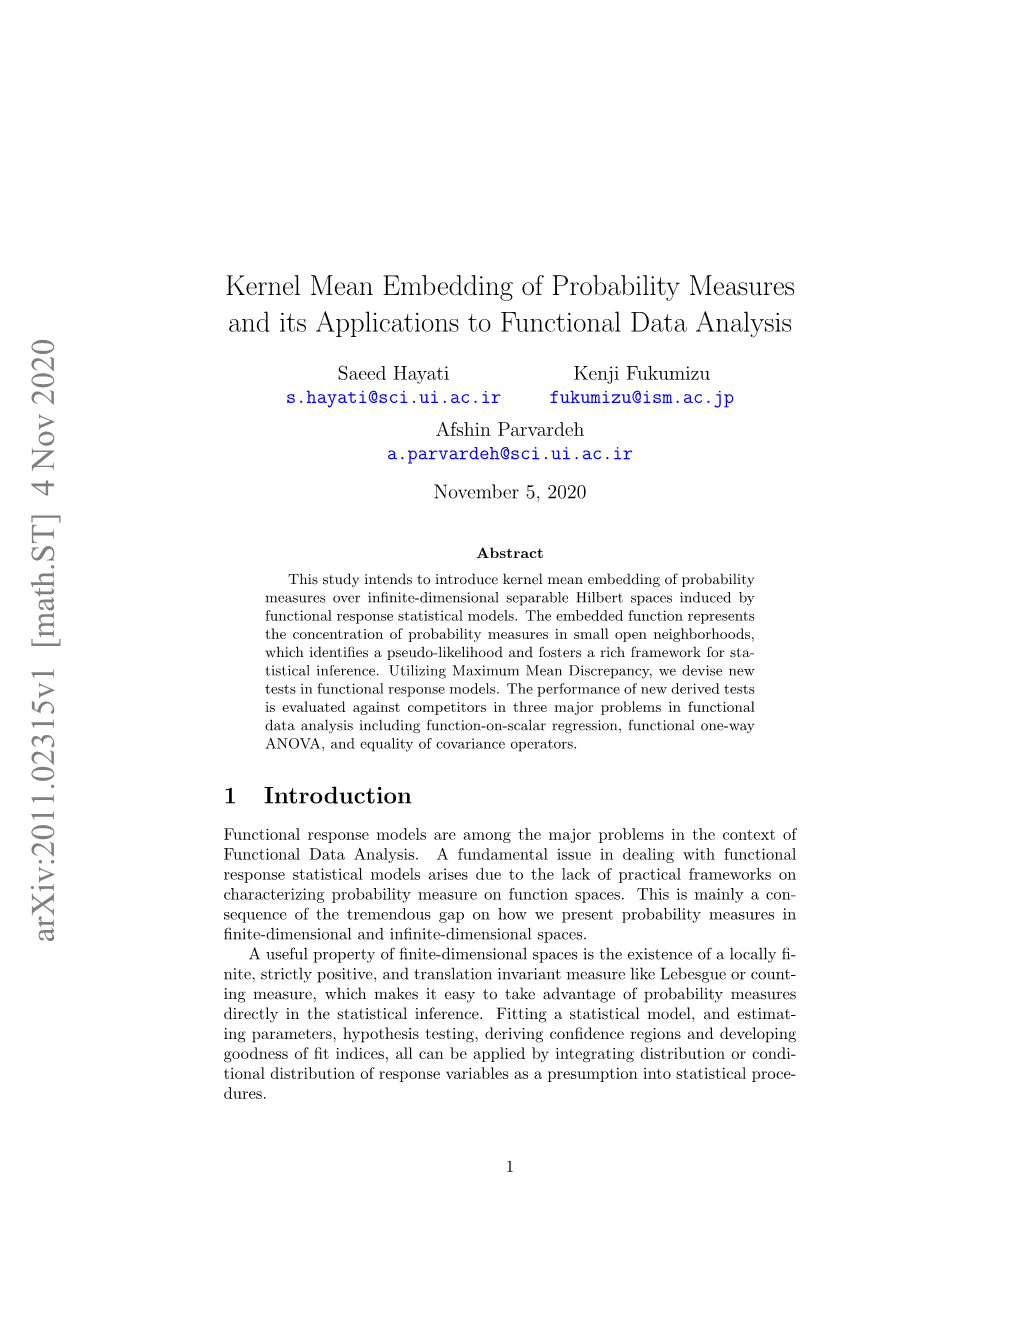 Kernel Mean Embedding of Probability Measures and Its Applications to Functional Data Analysis